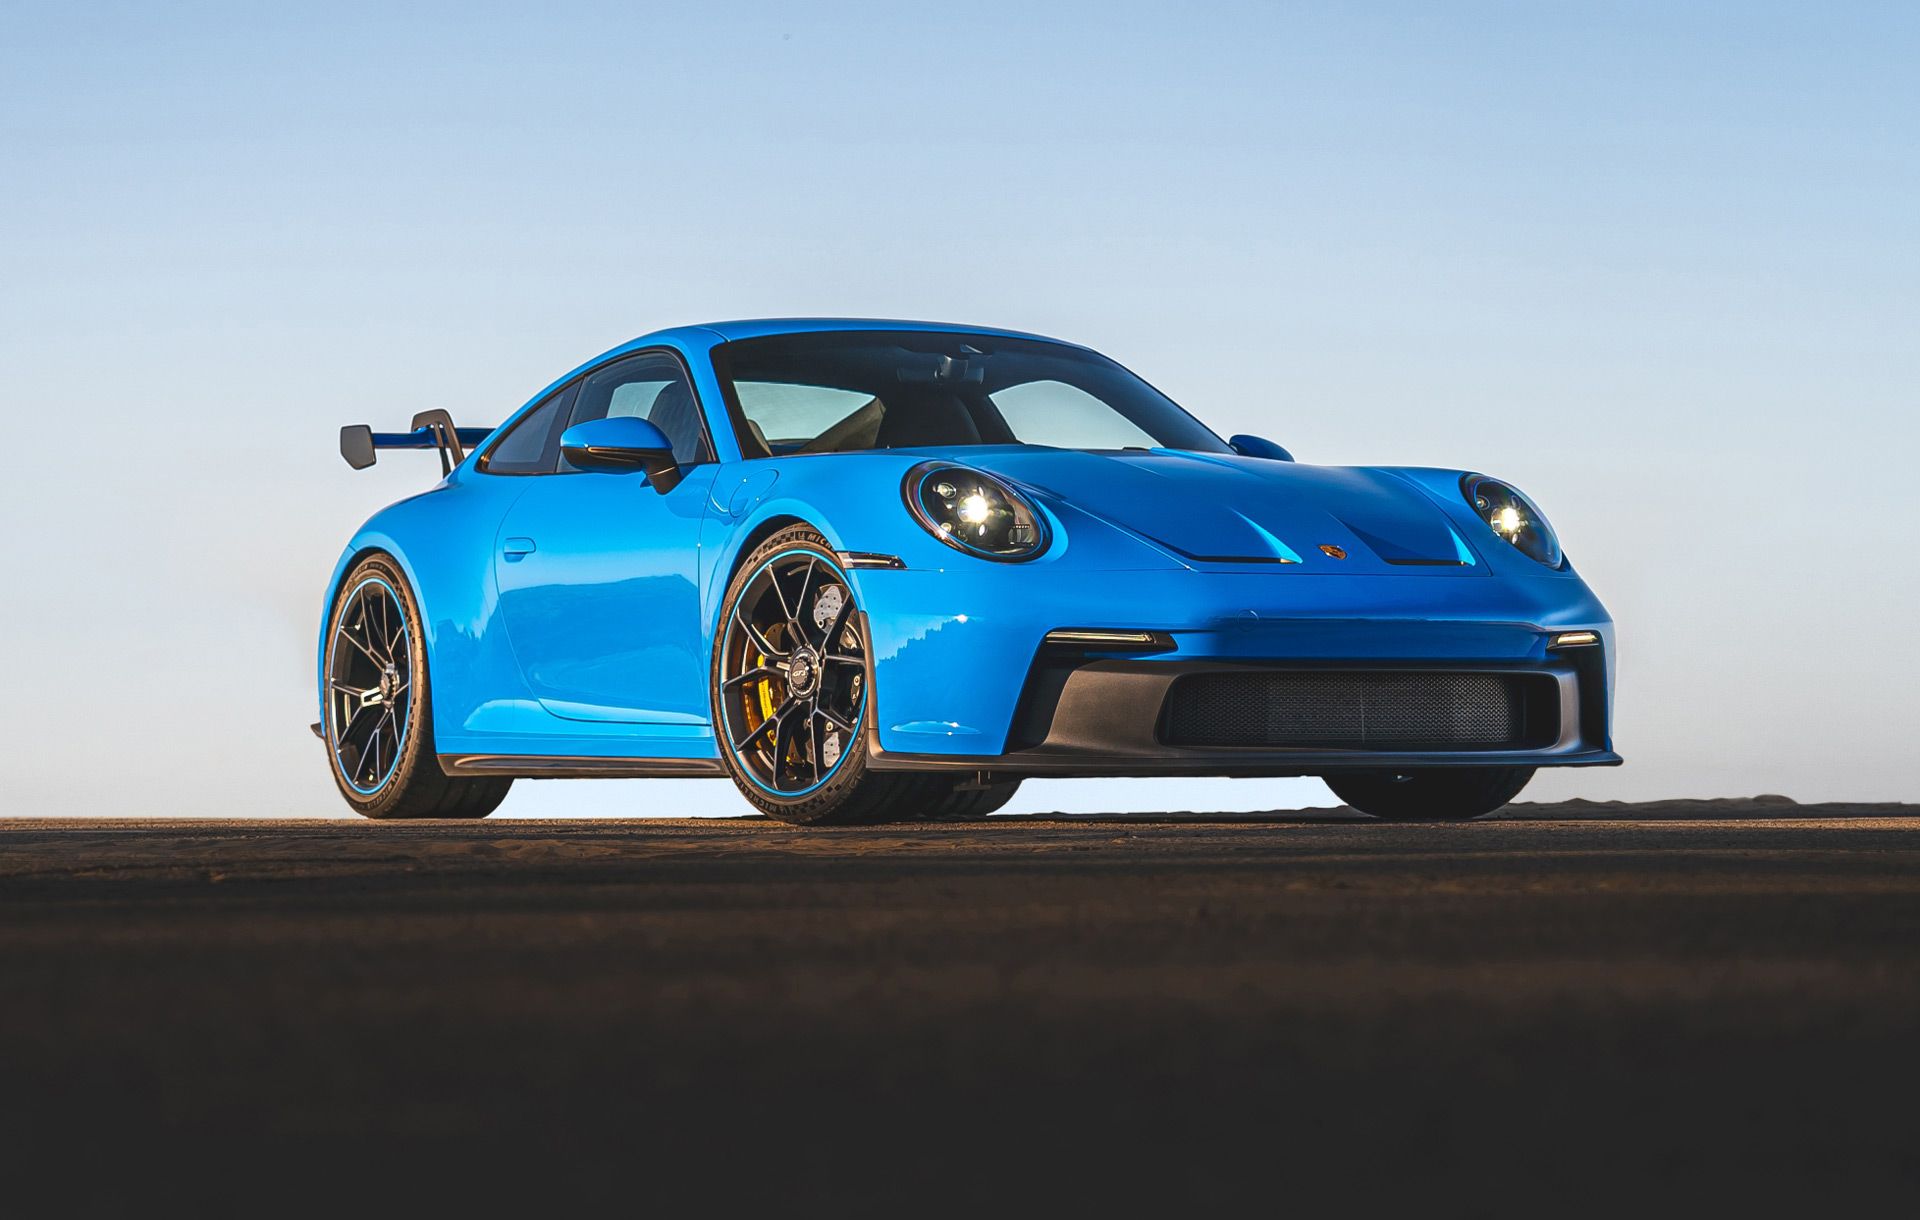 First drive review: The 2022 Porsche 911 GT3 is the best 911 yet